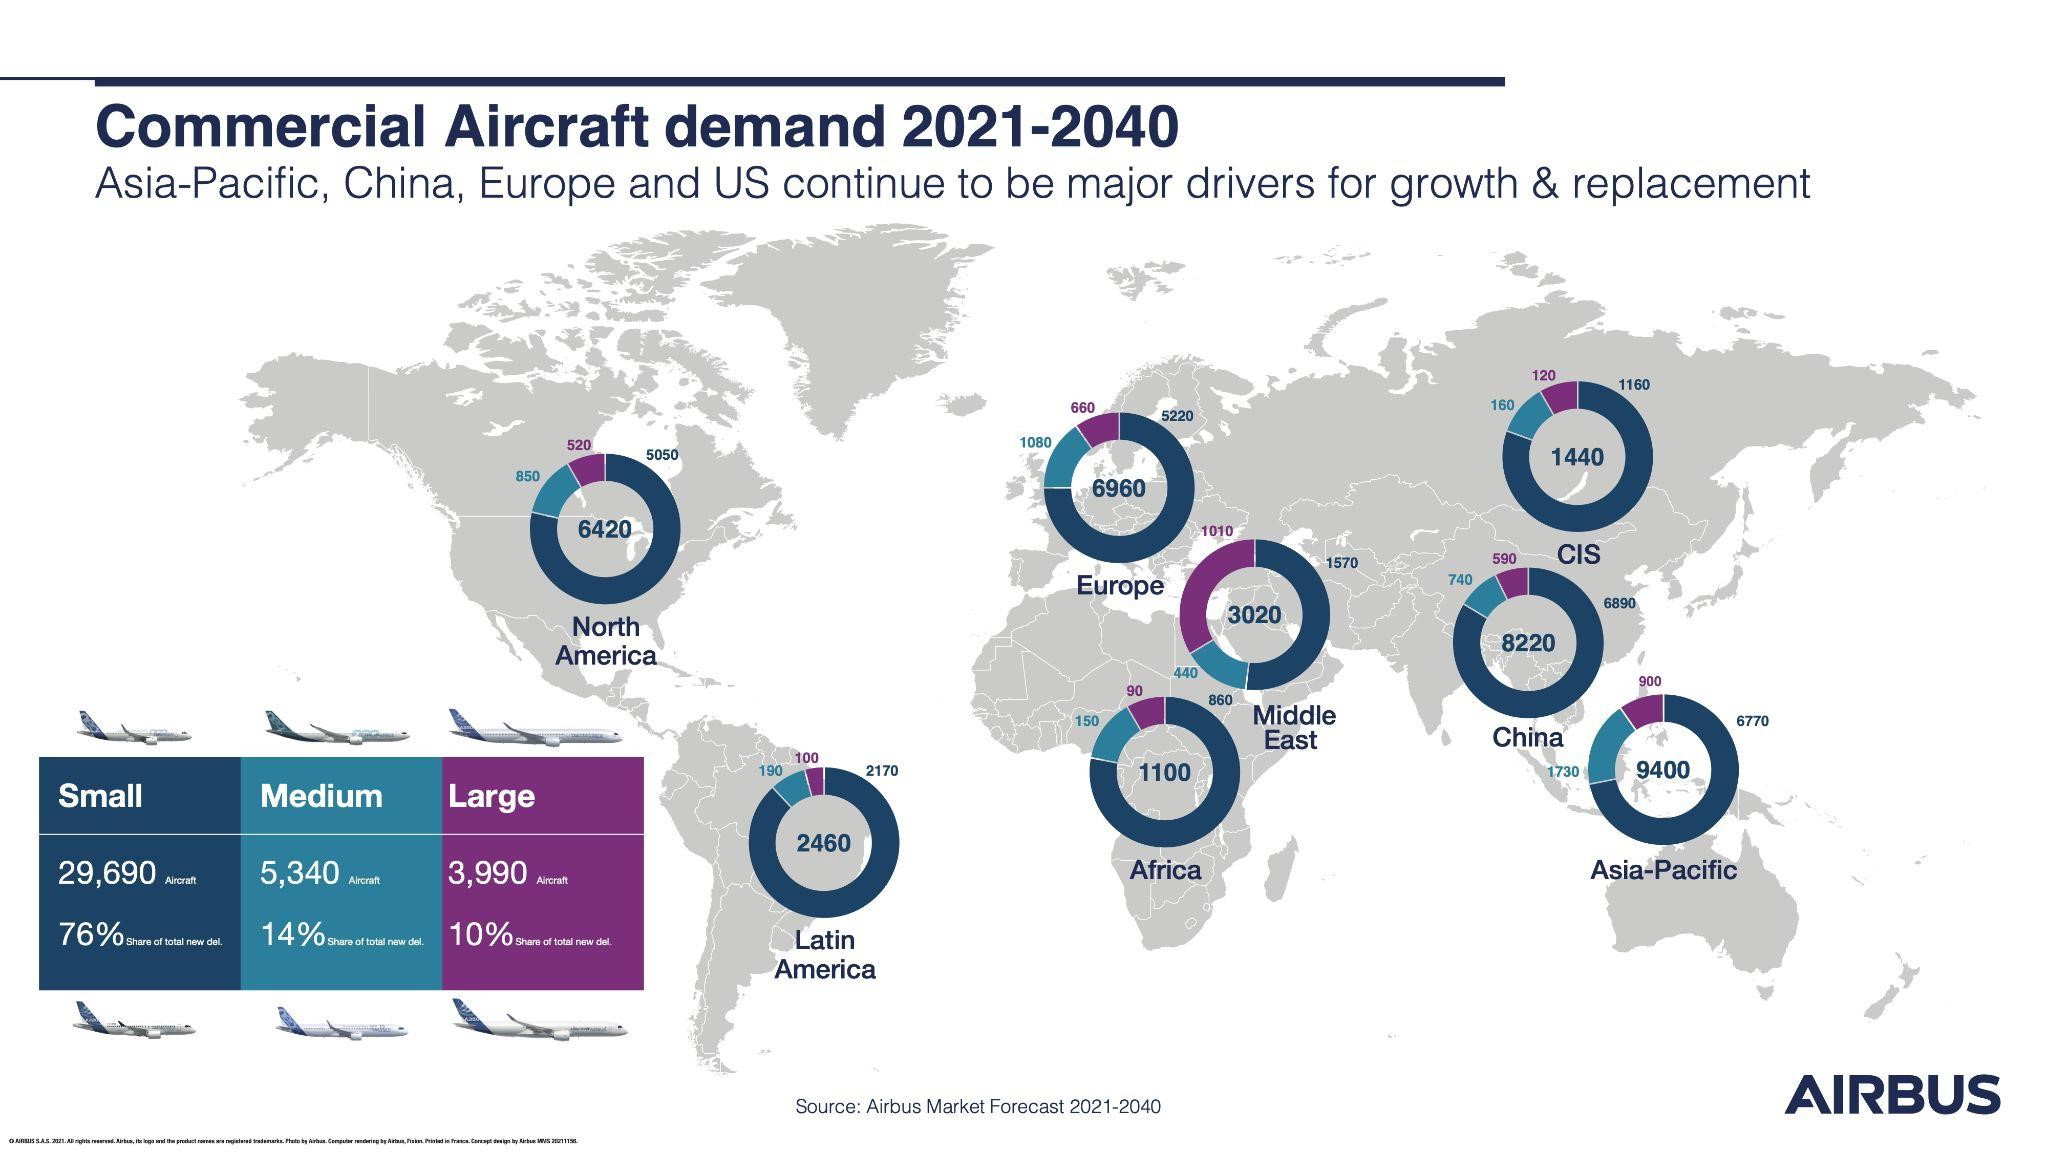 Airbus has forecast that the Asia-Pacific region will require 17,620 new passenger and freighter aircraft by 2040. Click to enlarge.